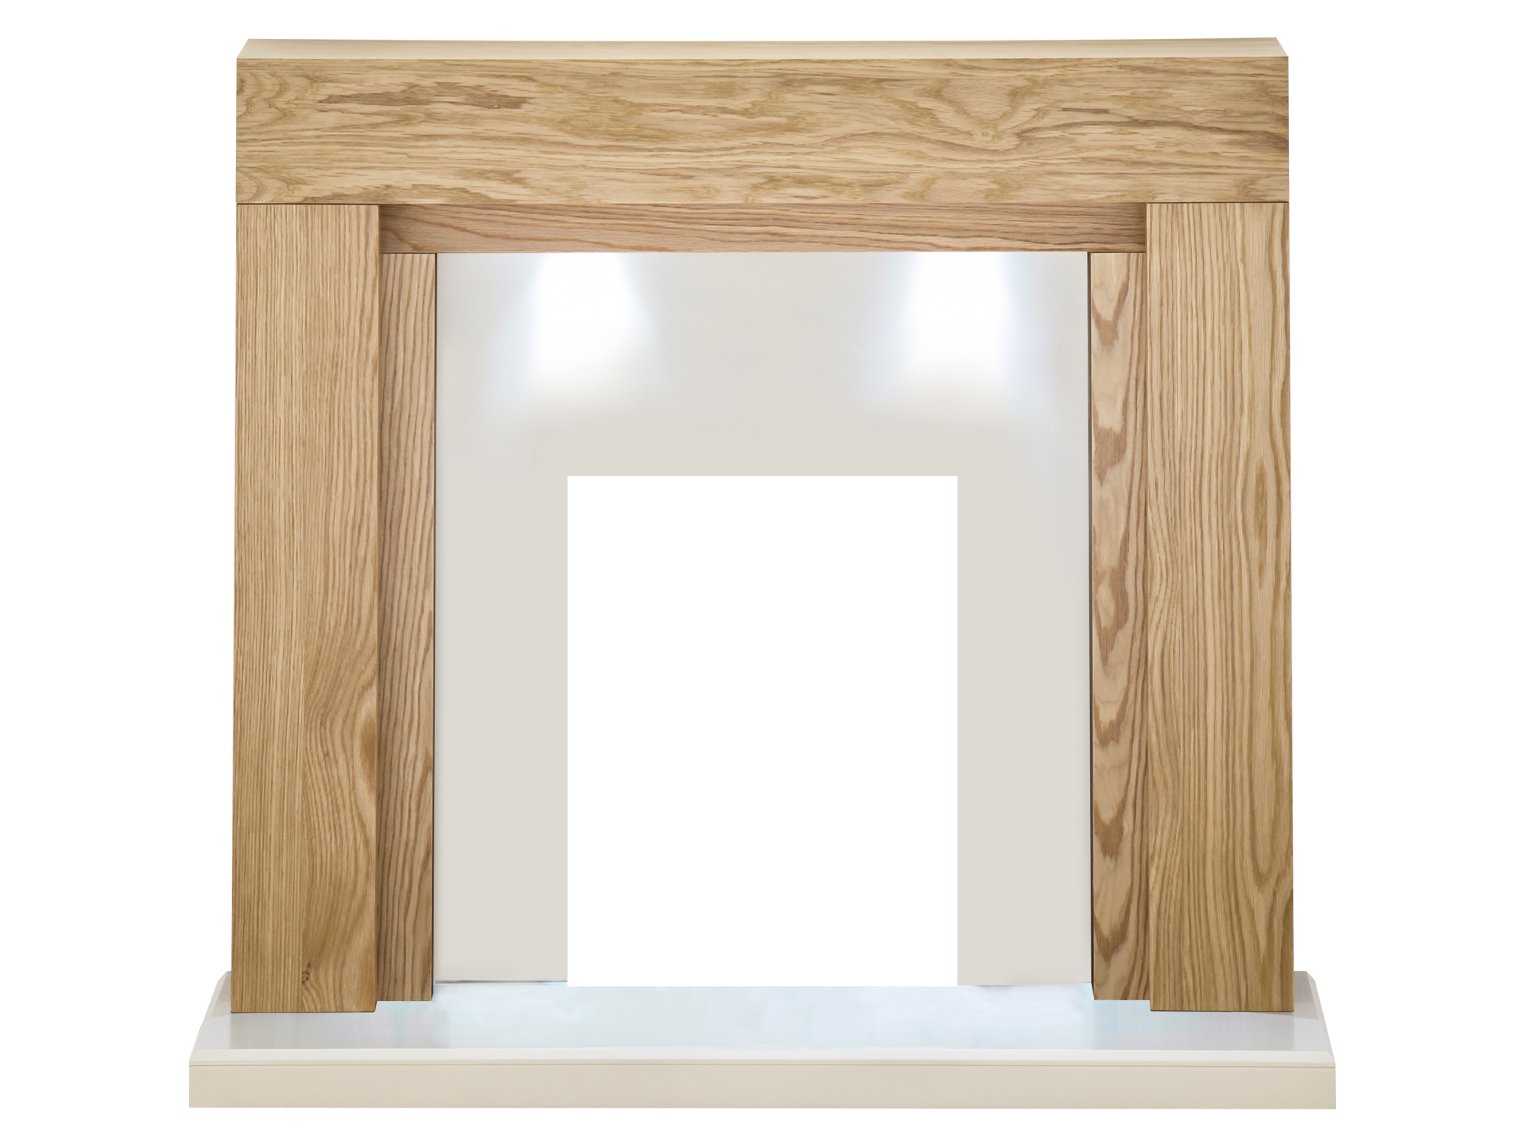 Adam Beaumont Fireplace in Oak and Cream with Downlights, 48 Inch